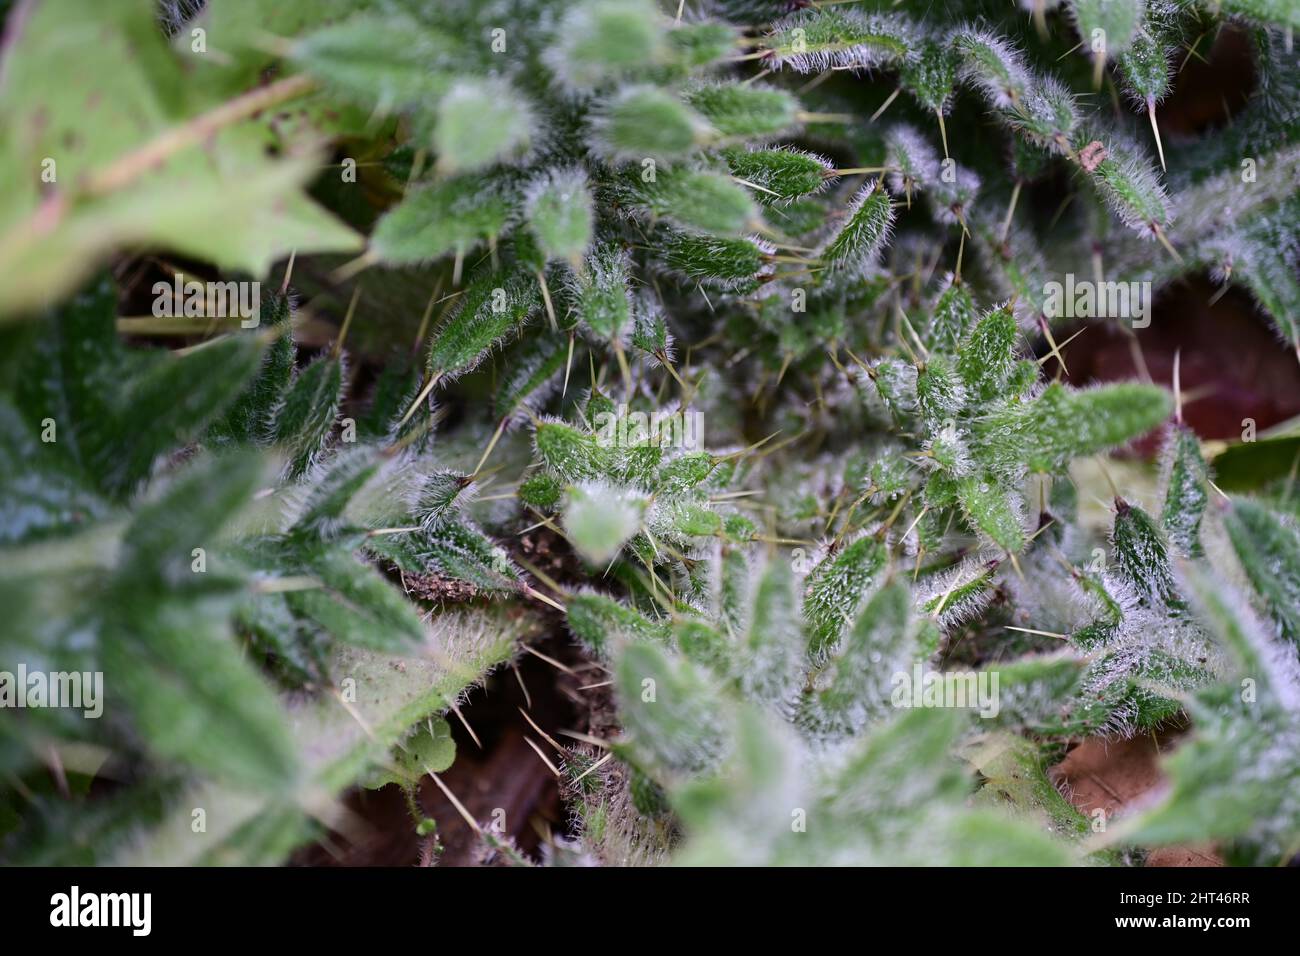 Closeup shot of Gundelia leaves, a high thistle-like perennial herbaceous plant with latex Stock Photo